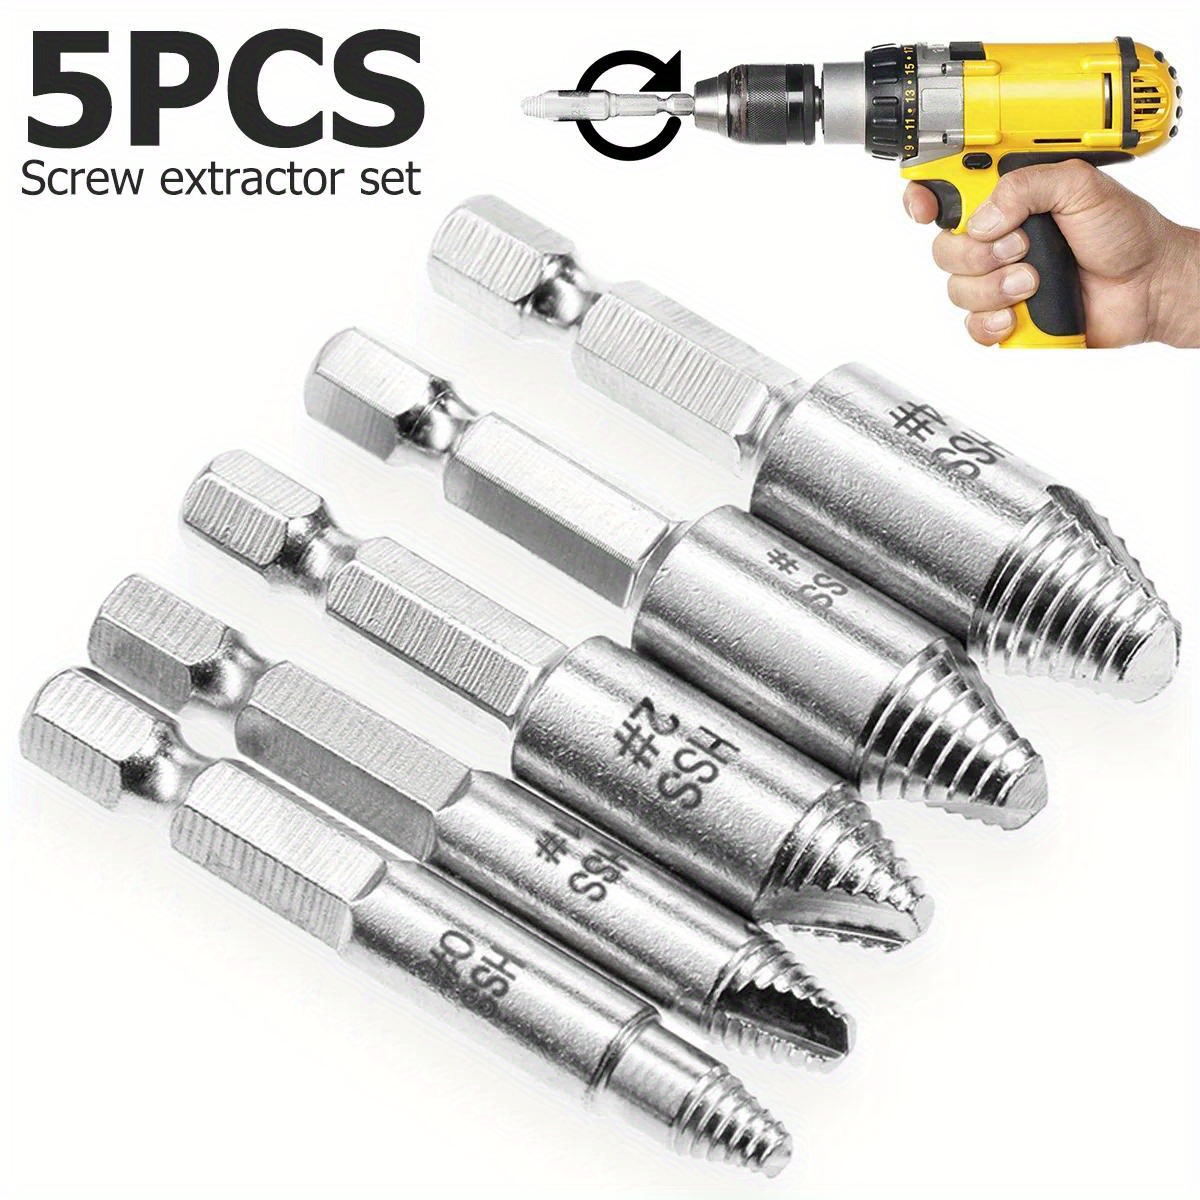 

5pcs Damaged Screw Extractor Set - High-speed Steel, Manual Metal Bolt Remover For Stripped Screws And Bolts, Easy Out Drill Bits Tool Set With No Electricity Needed